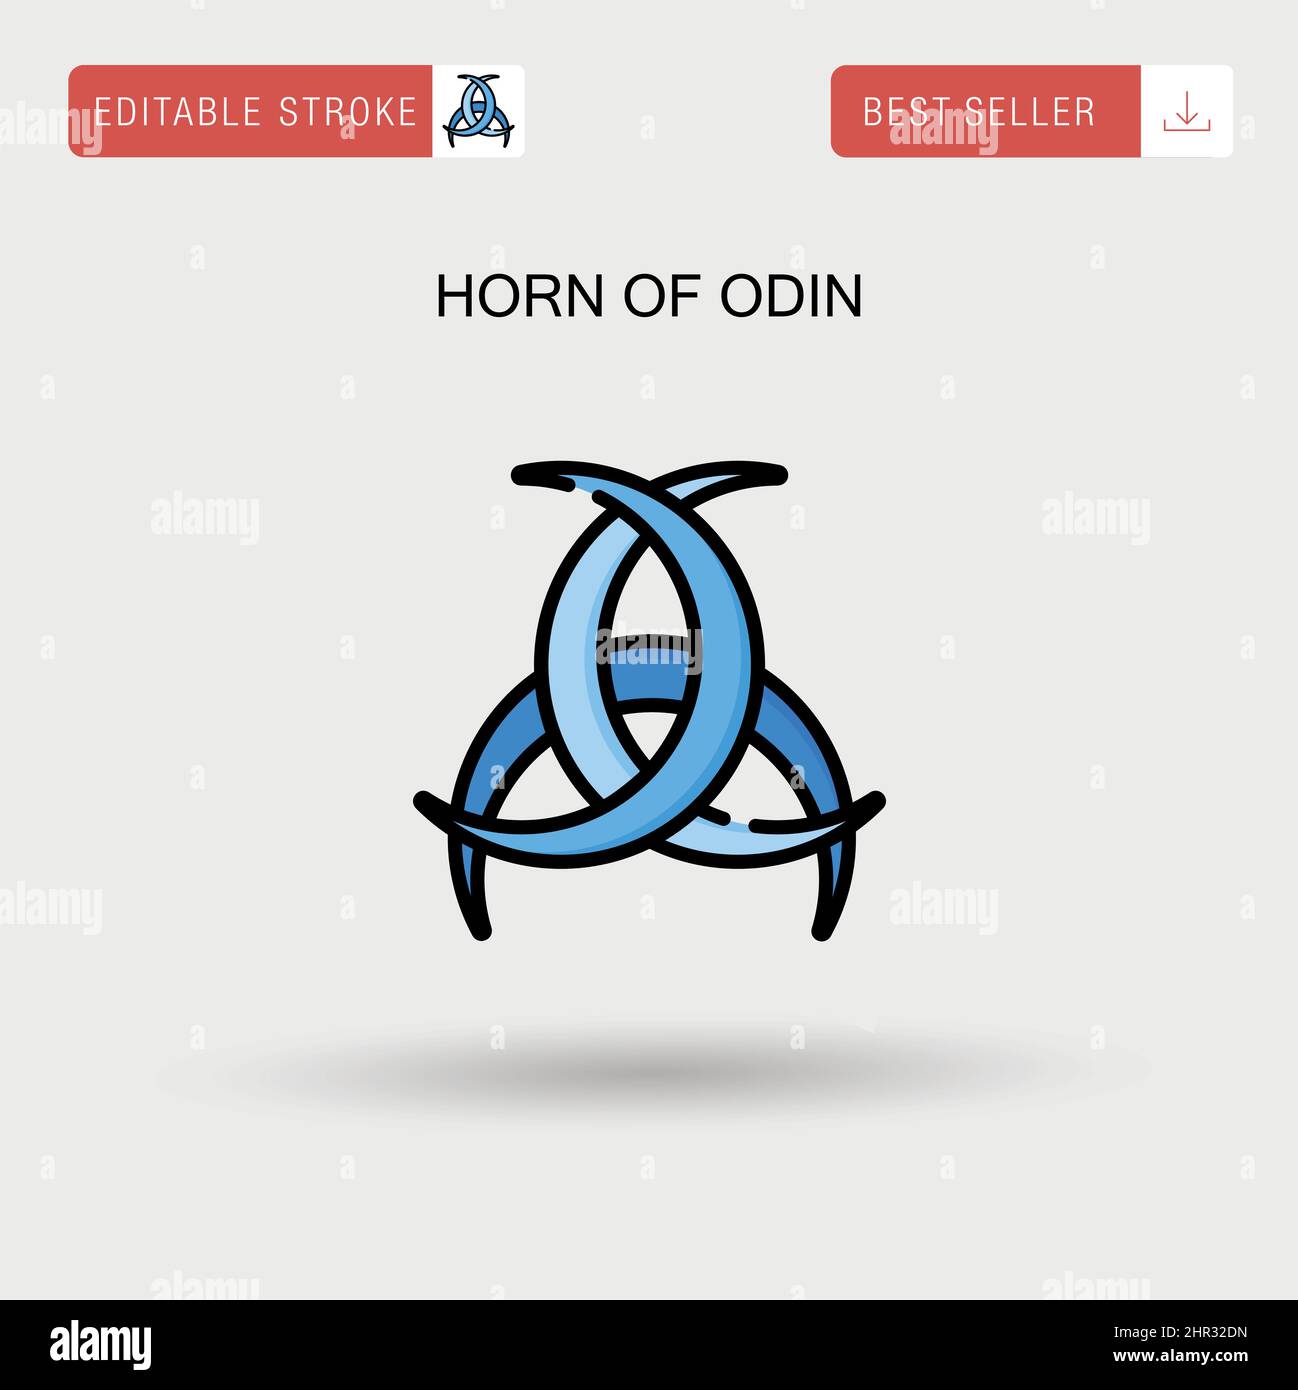 Horn of odin Simple vector icon. Stock Vector